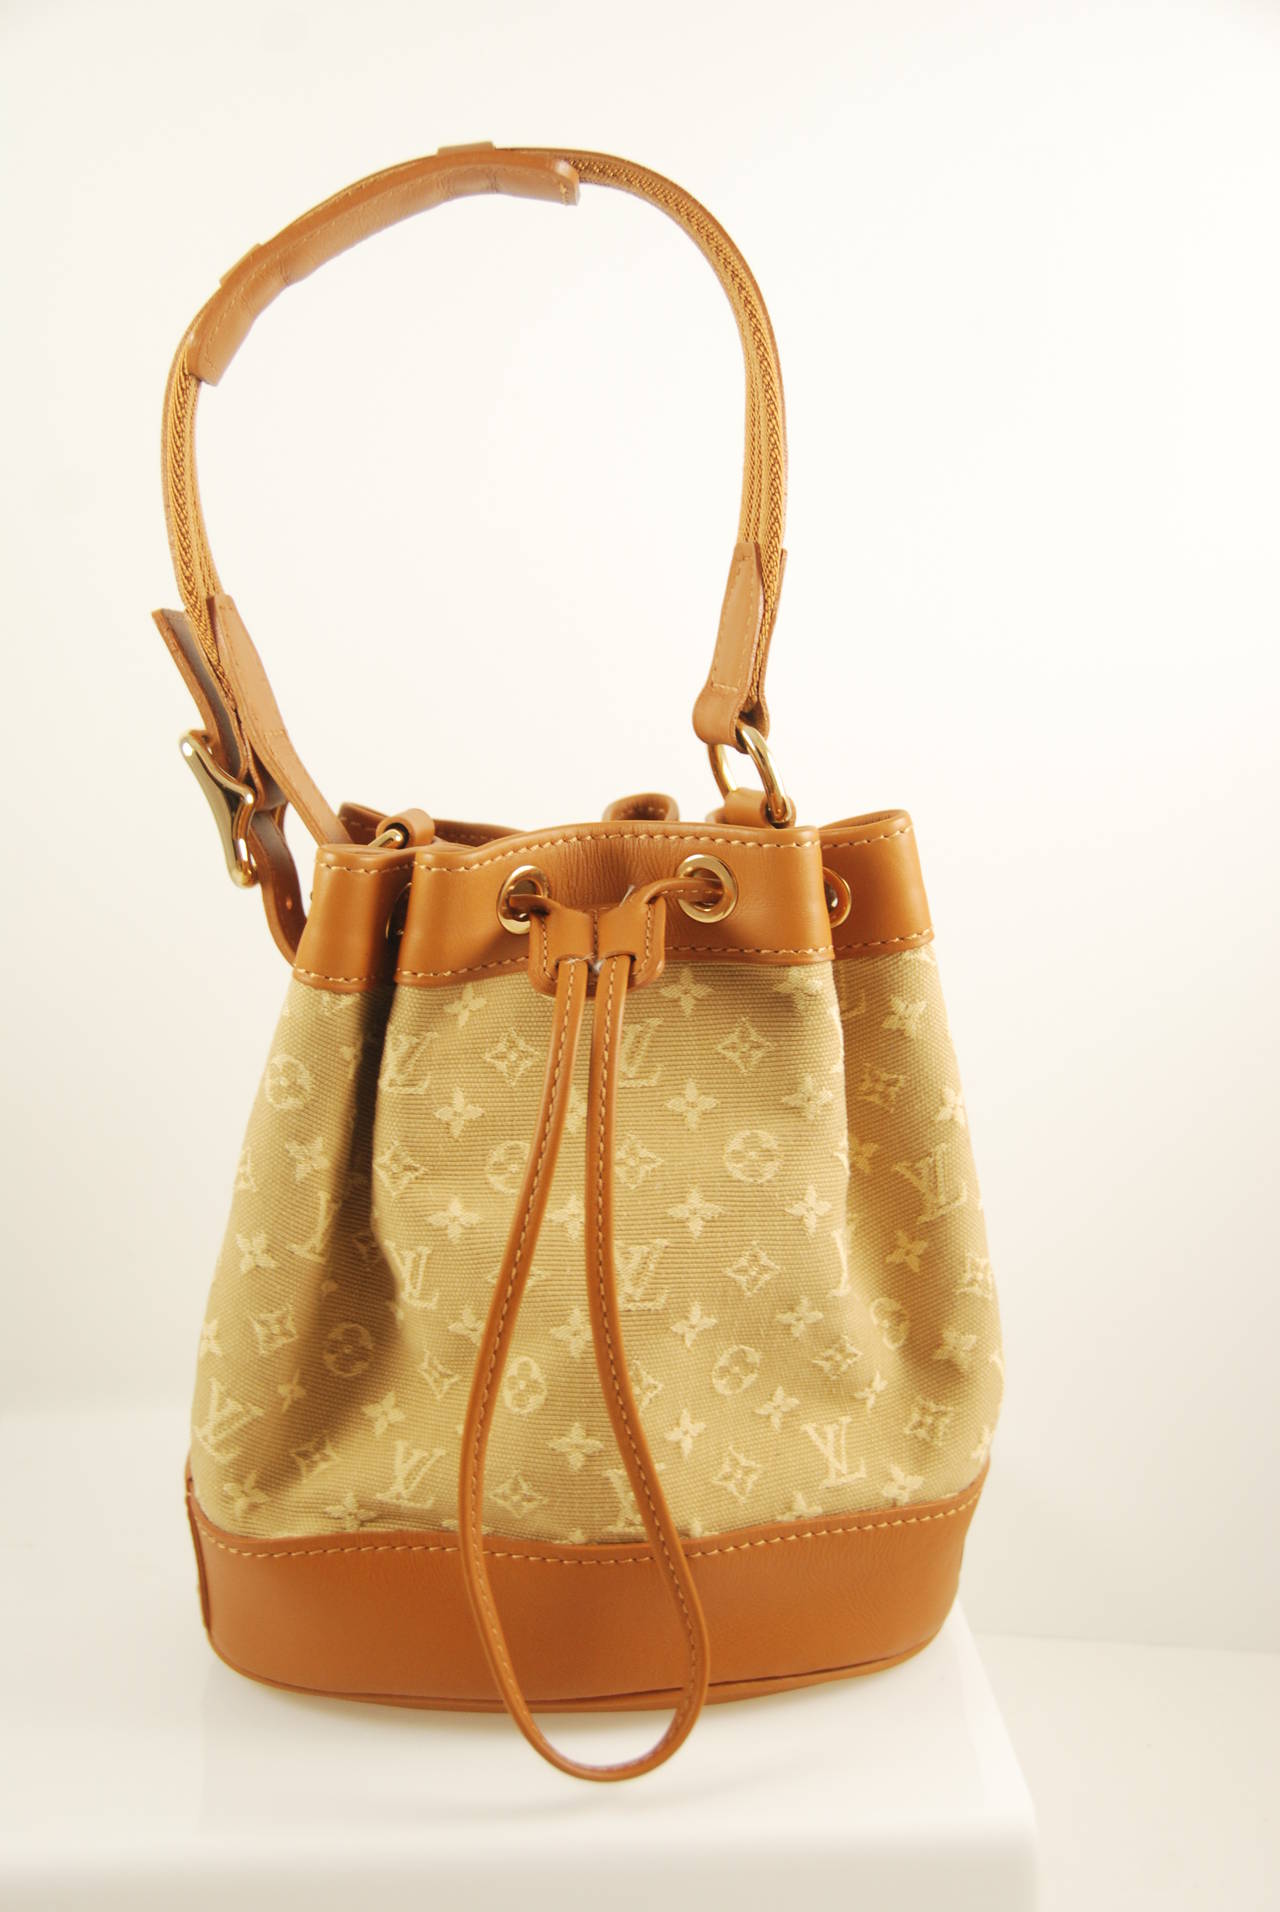 Louis Vuitton mini Noe bucket bag in tan calf skin trimming, strap and base. The body of the bag is is monogram Idylle canvas. Hardware is shiny brass and has a thread leather closure. The strap has a 6.5